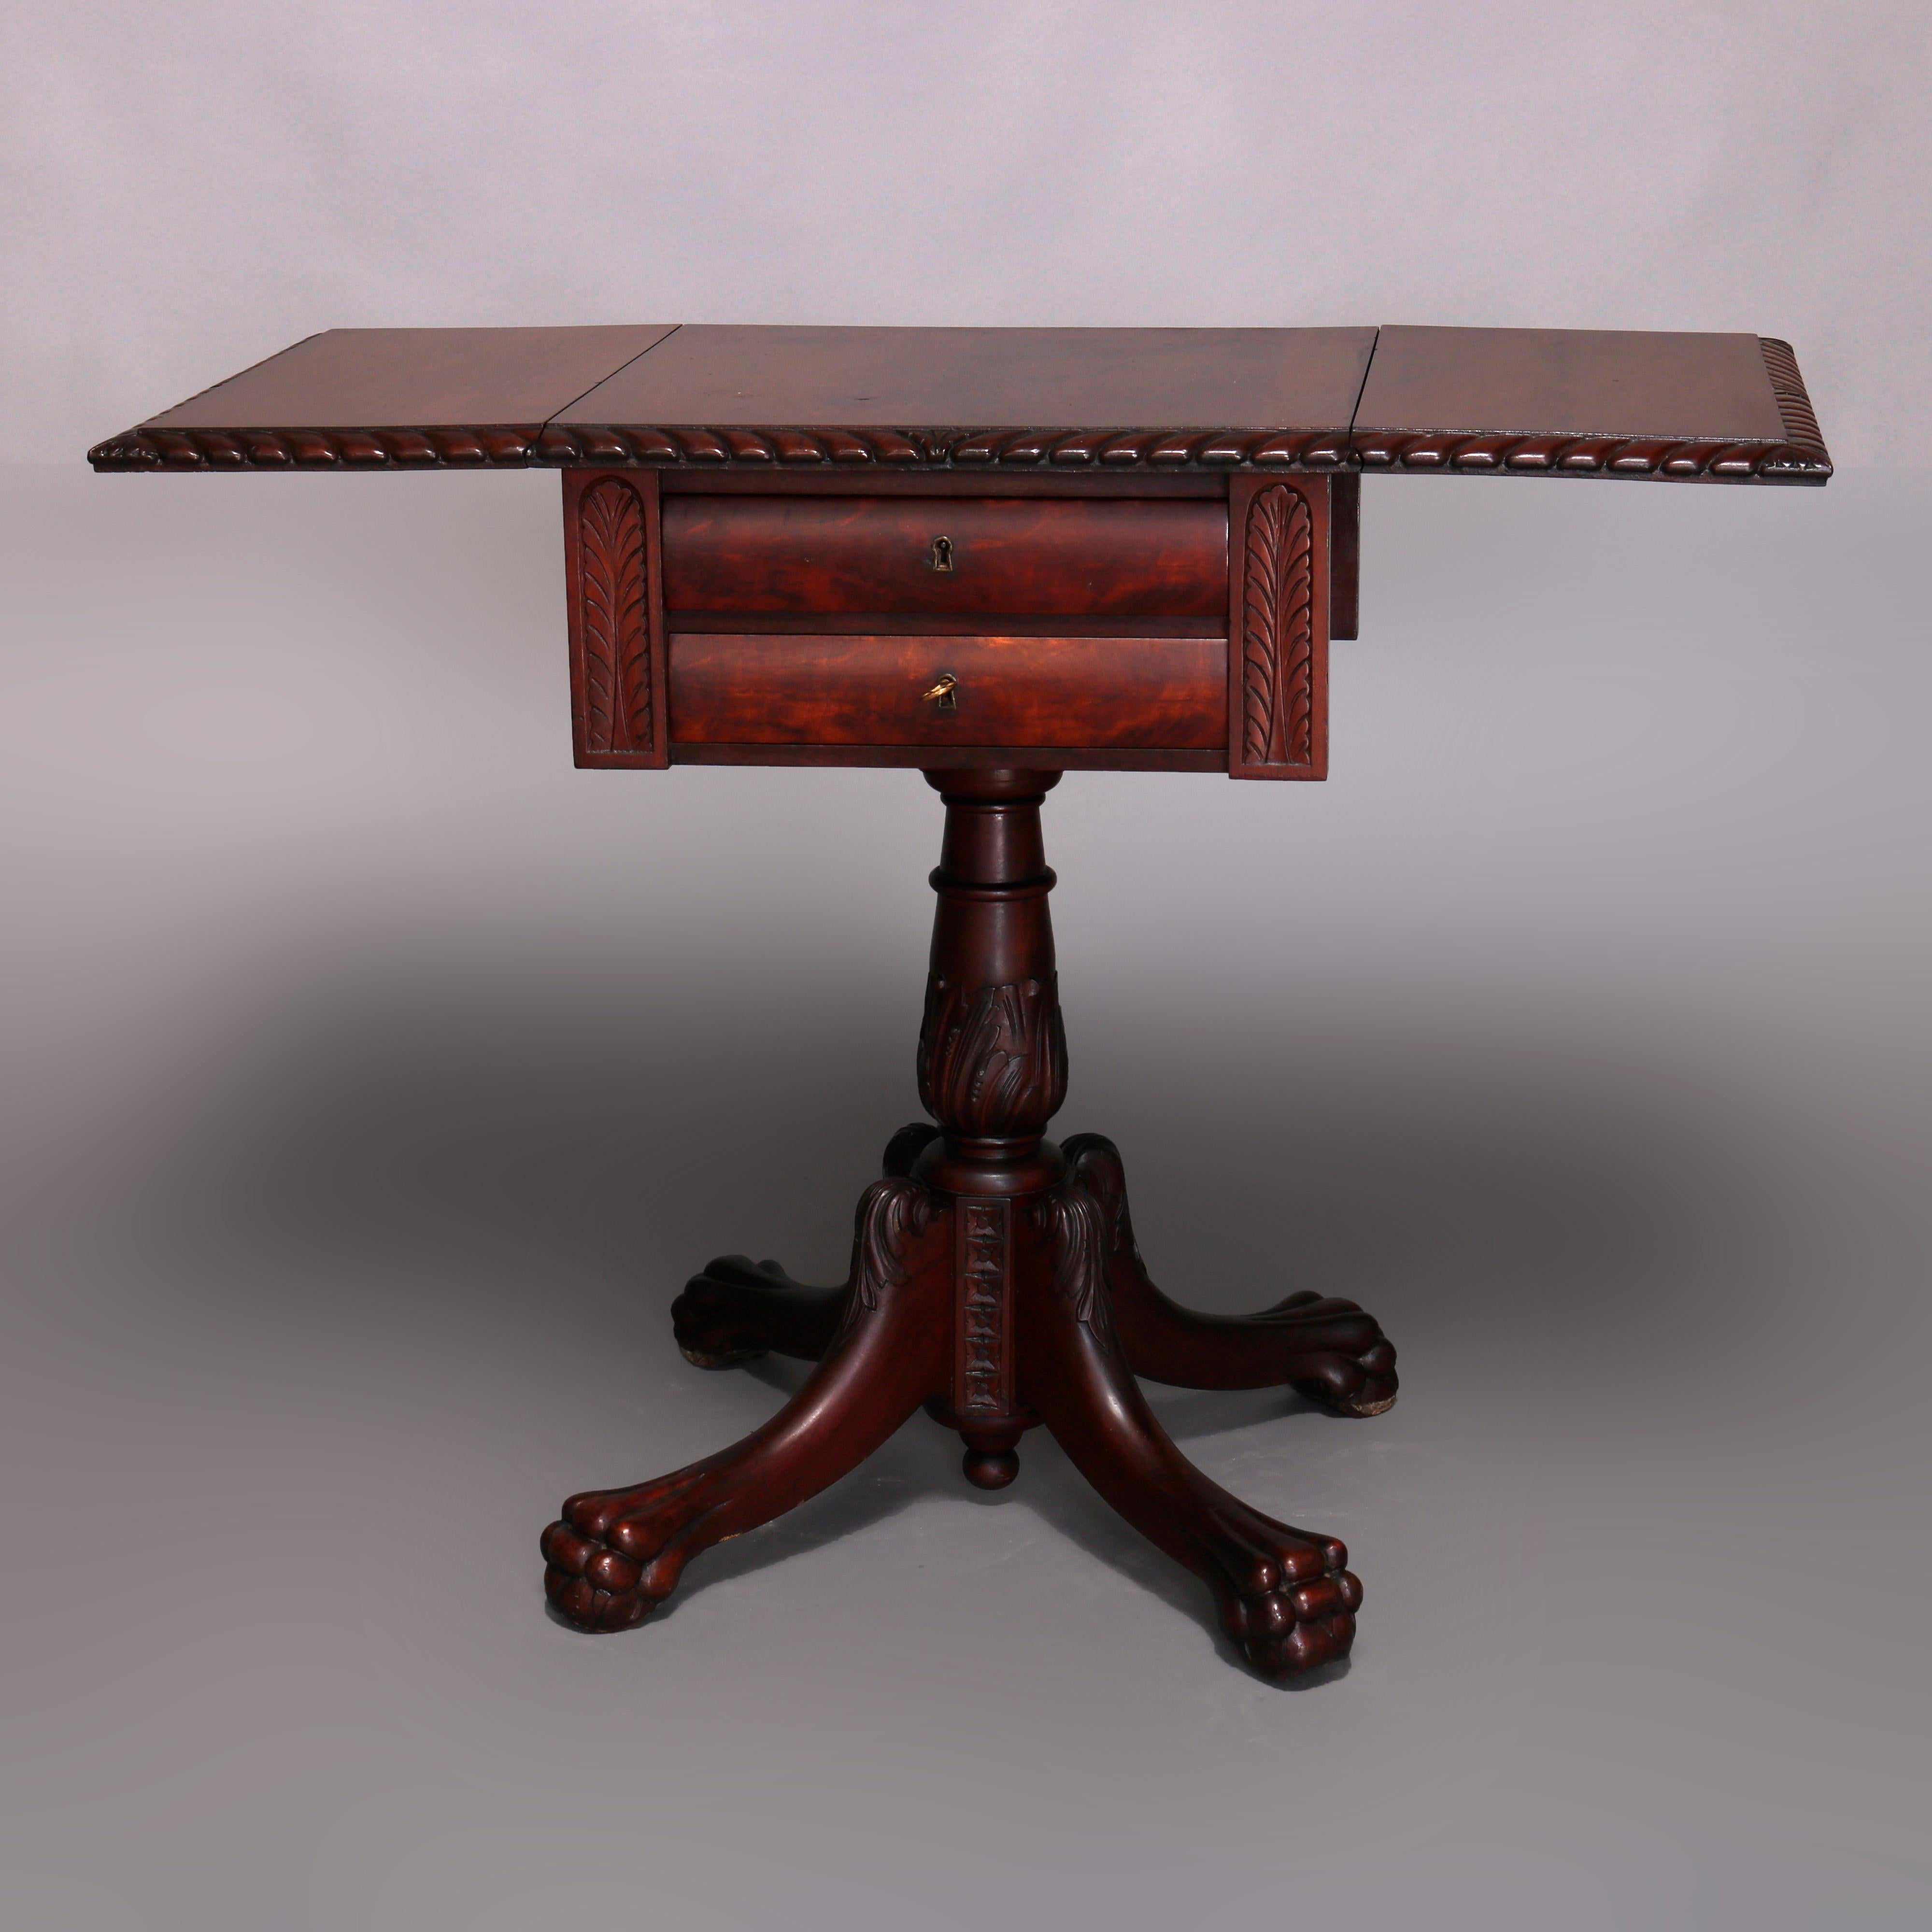 Carved Antique Classical American Empire Flame Mahogany Drop Leaf Stand, 19th Century